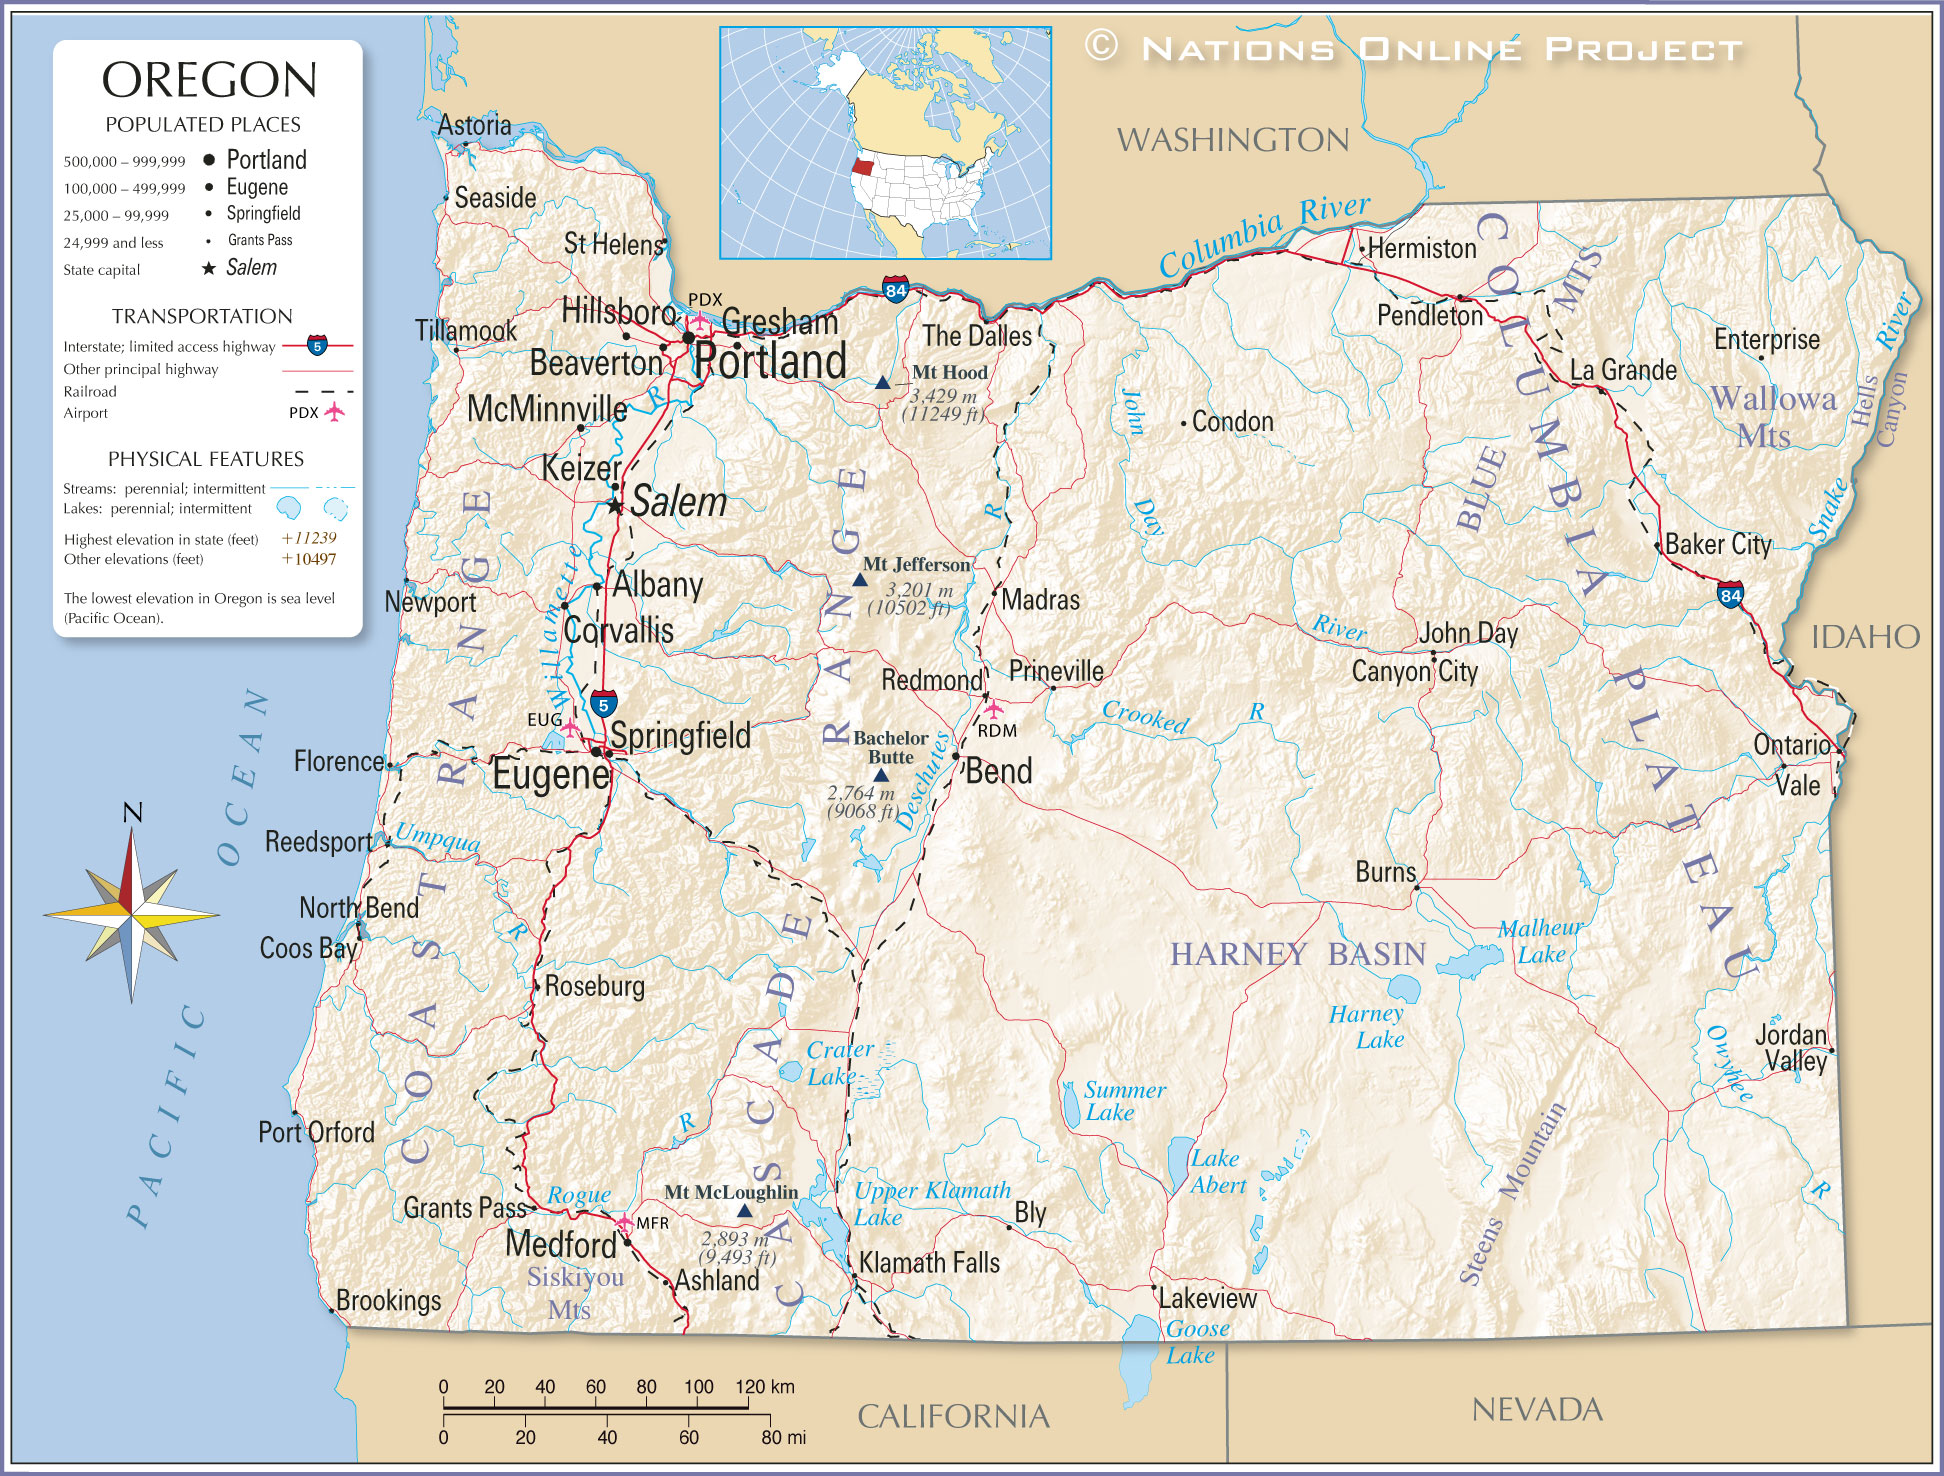 Reference Maps of Oregon, USA - Nations Online Project